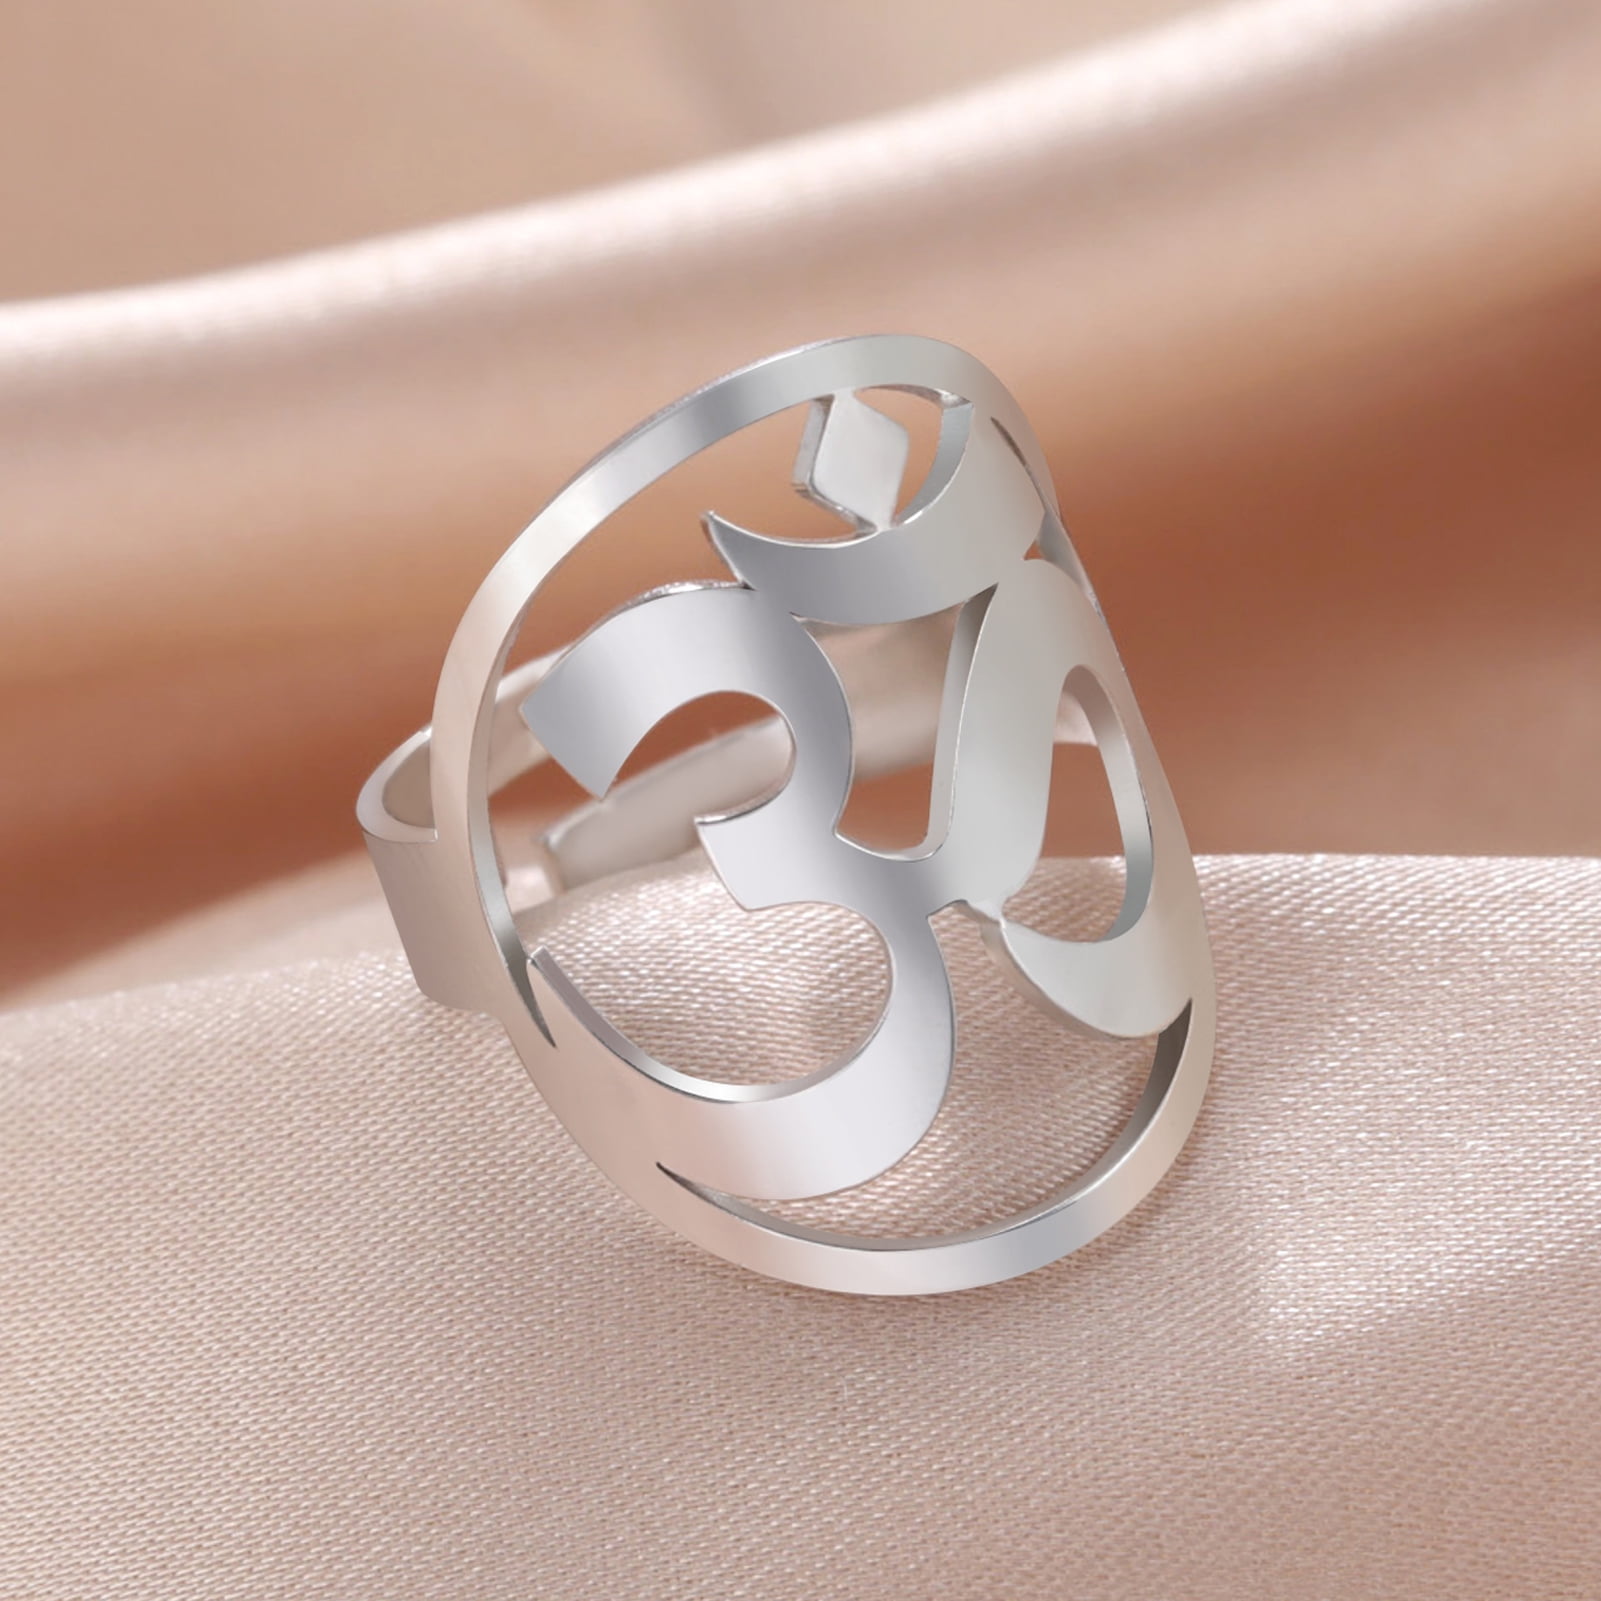 Sterling Silver OM Sign Ring, Yoga Ring, Religious Ring, Silver Ring | eBay